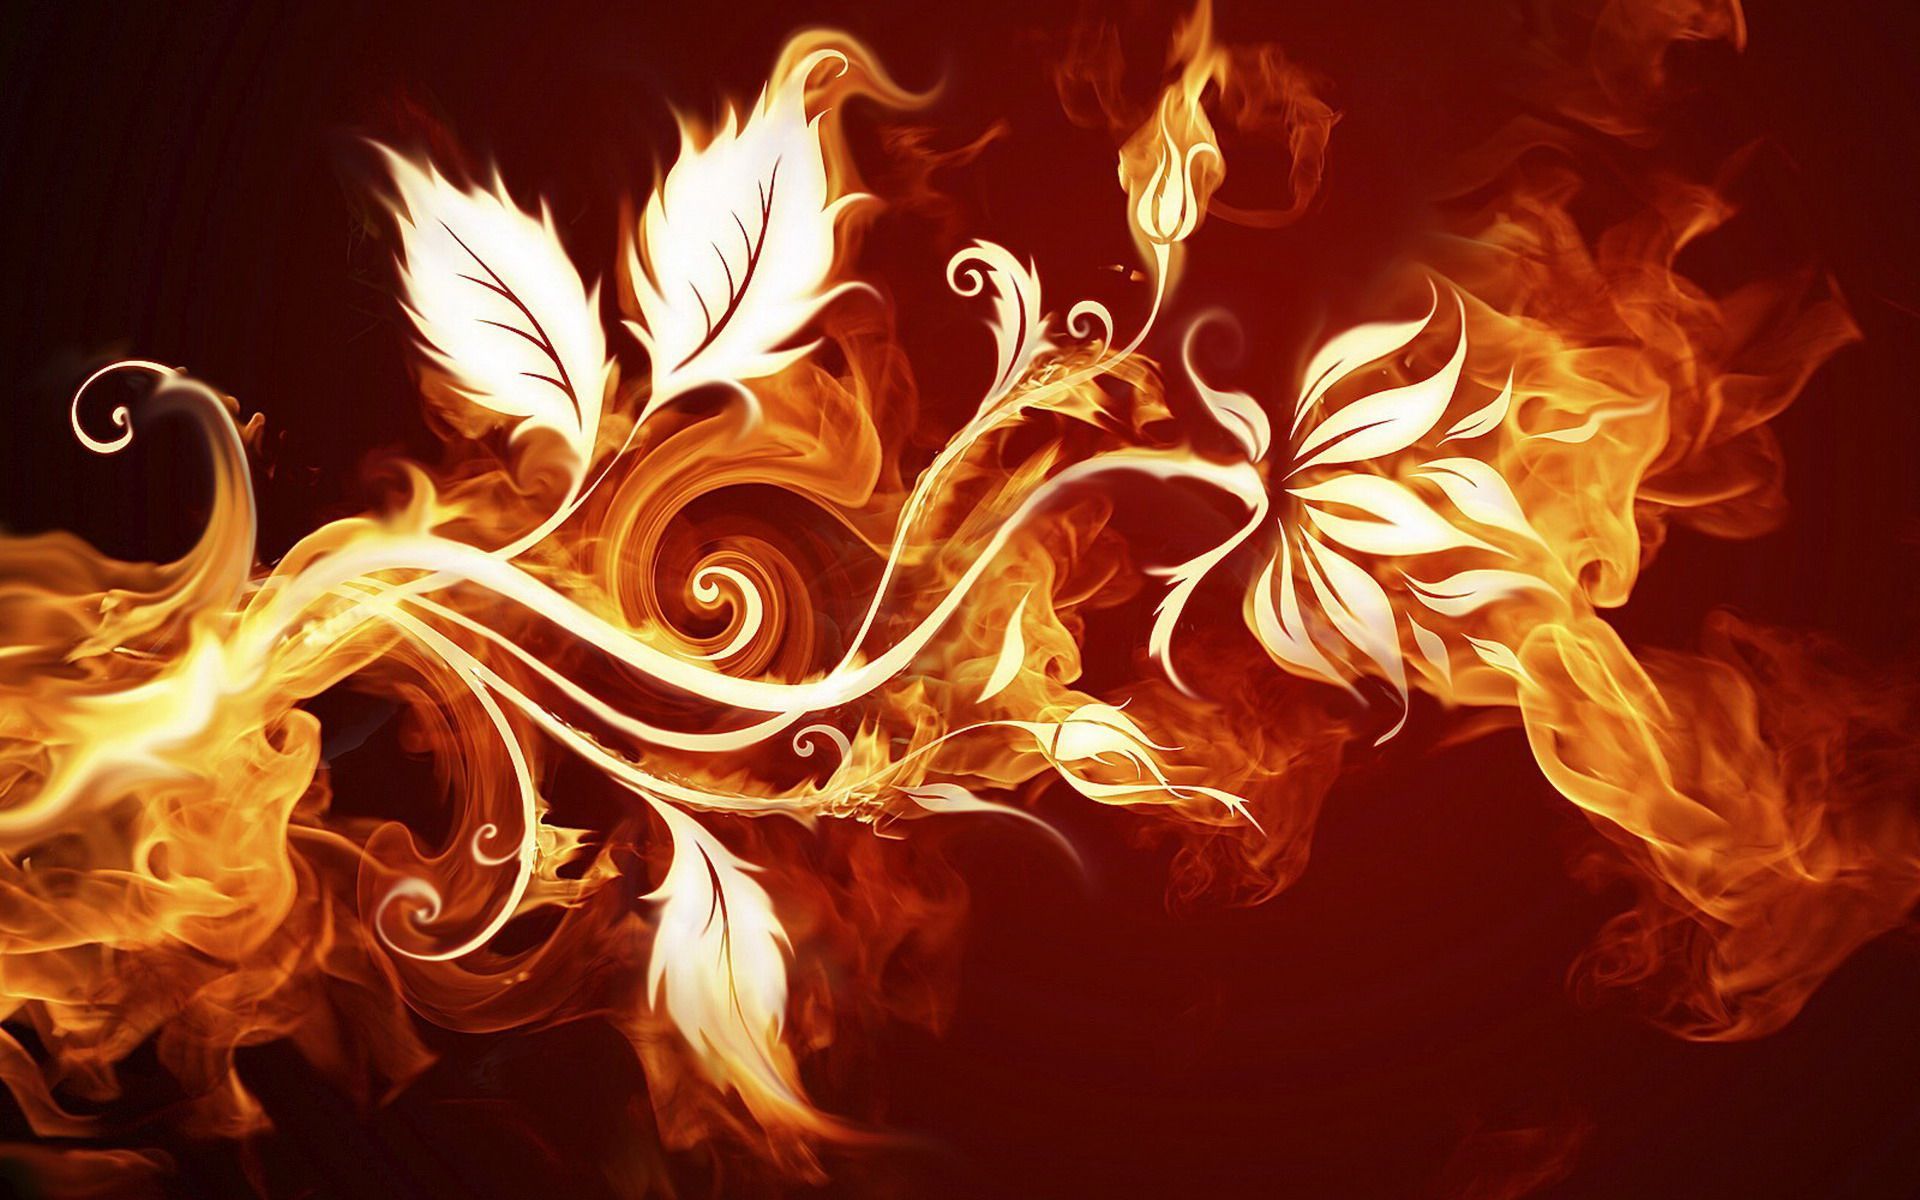 Abstract-Fire-Leaves-and-Flowers-Wallpaper-for-Desktop.jpg